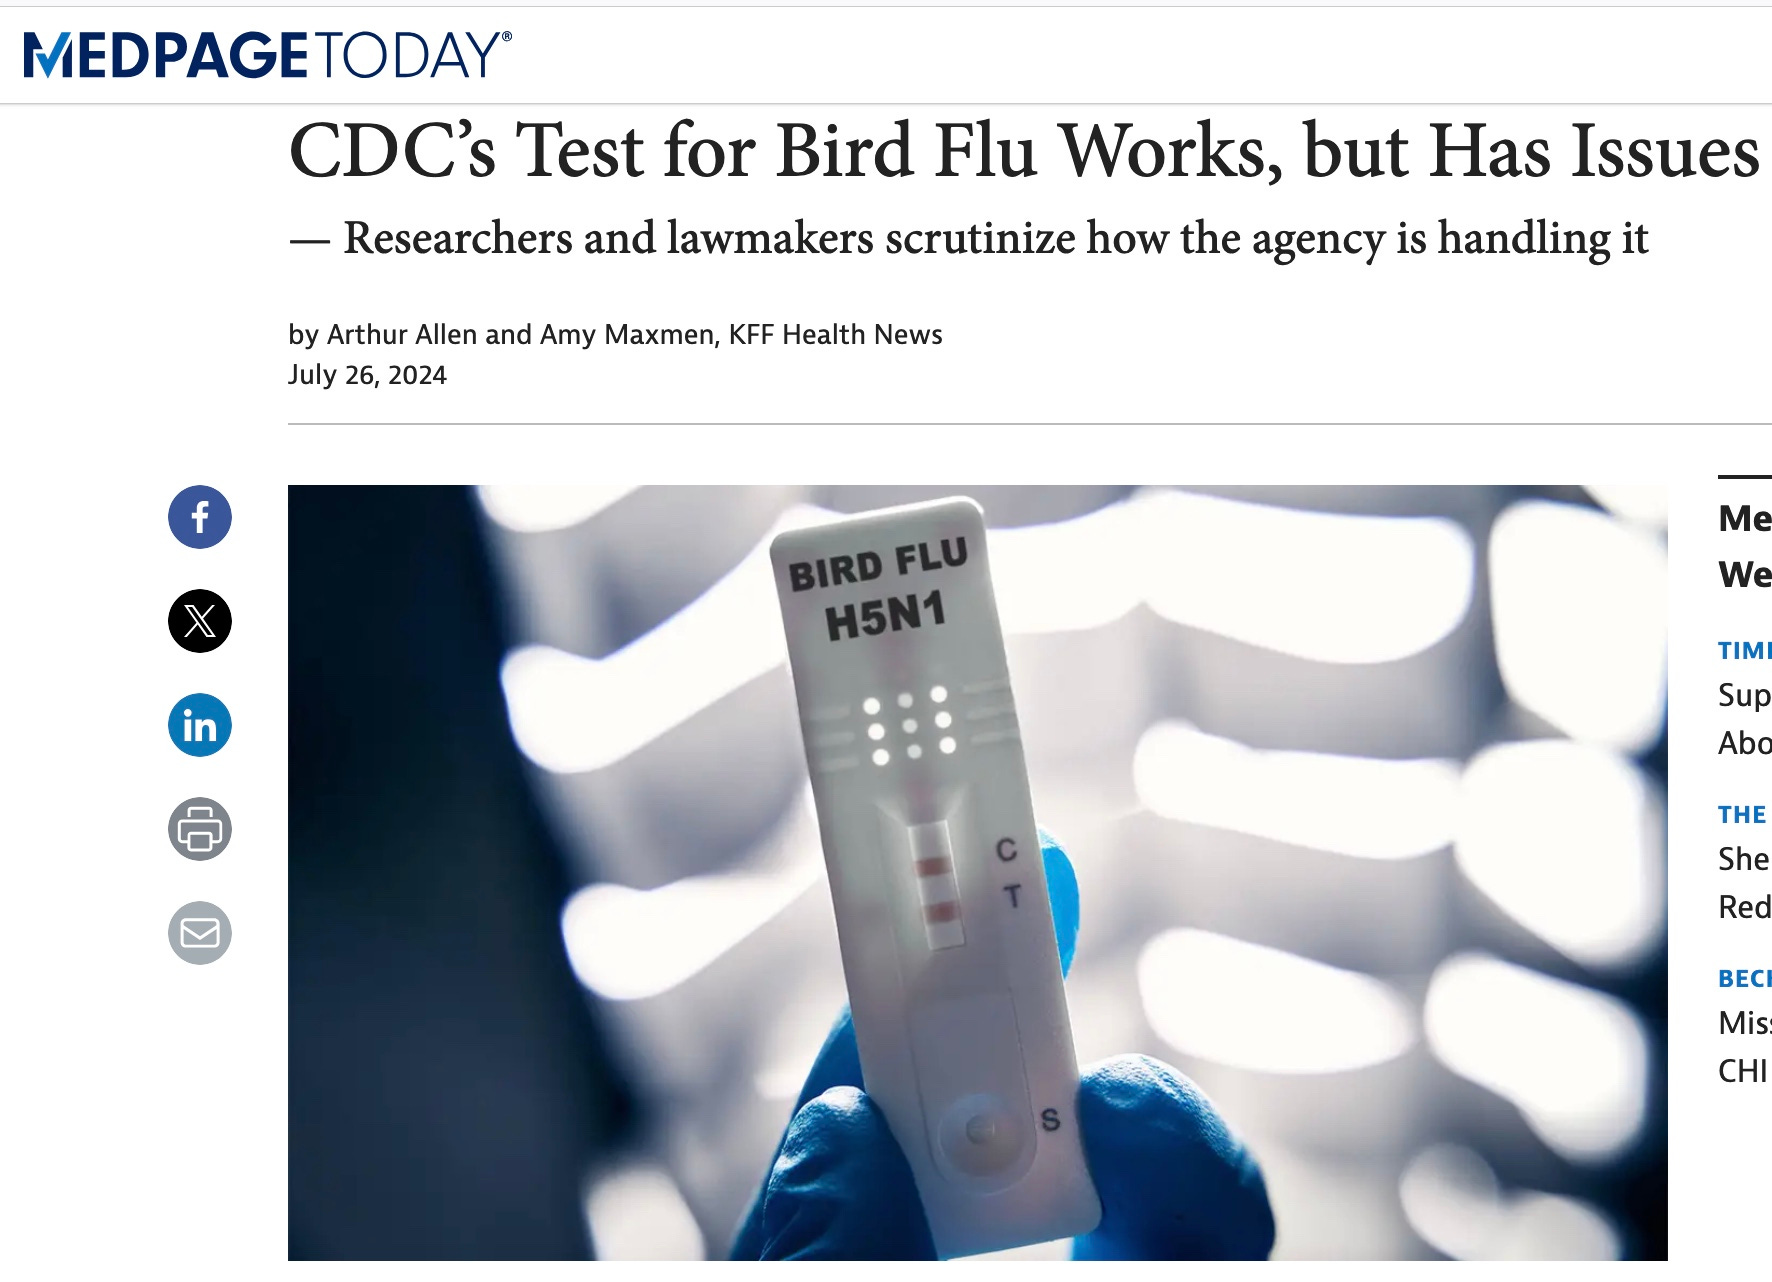 merylnass.substack.com - Meryl Nass - Only CDC is allowed to test and diagnose people with bird flu. But its test is faulty. It only tested 45 people. Yet commercial lab tests are verboten.